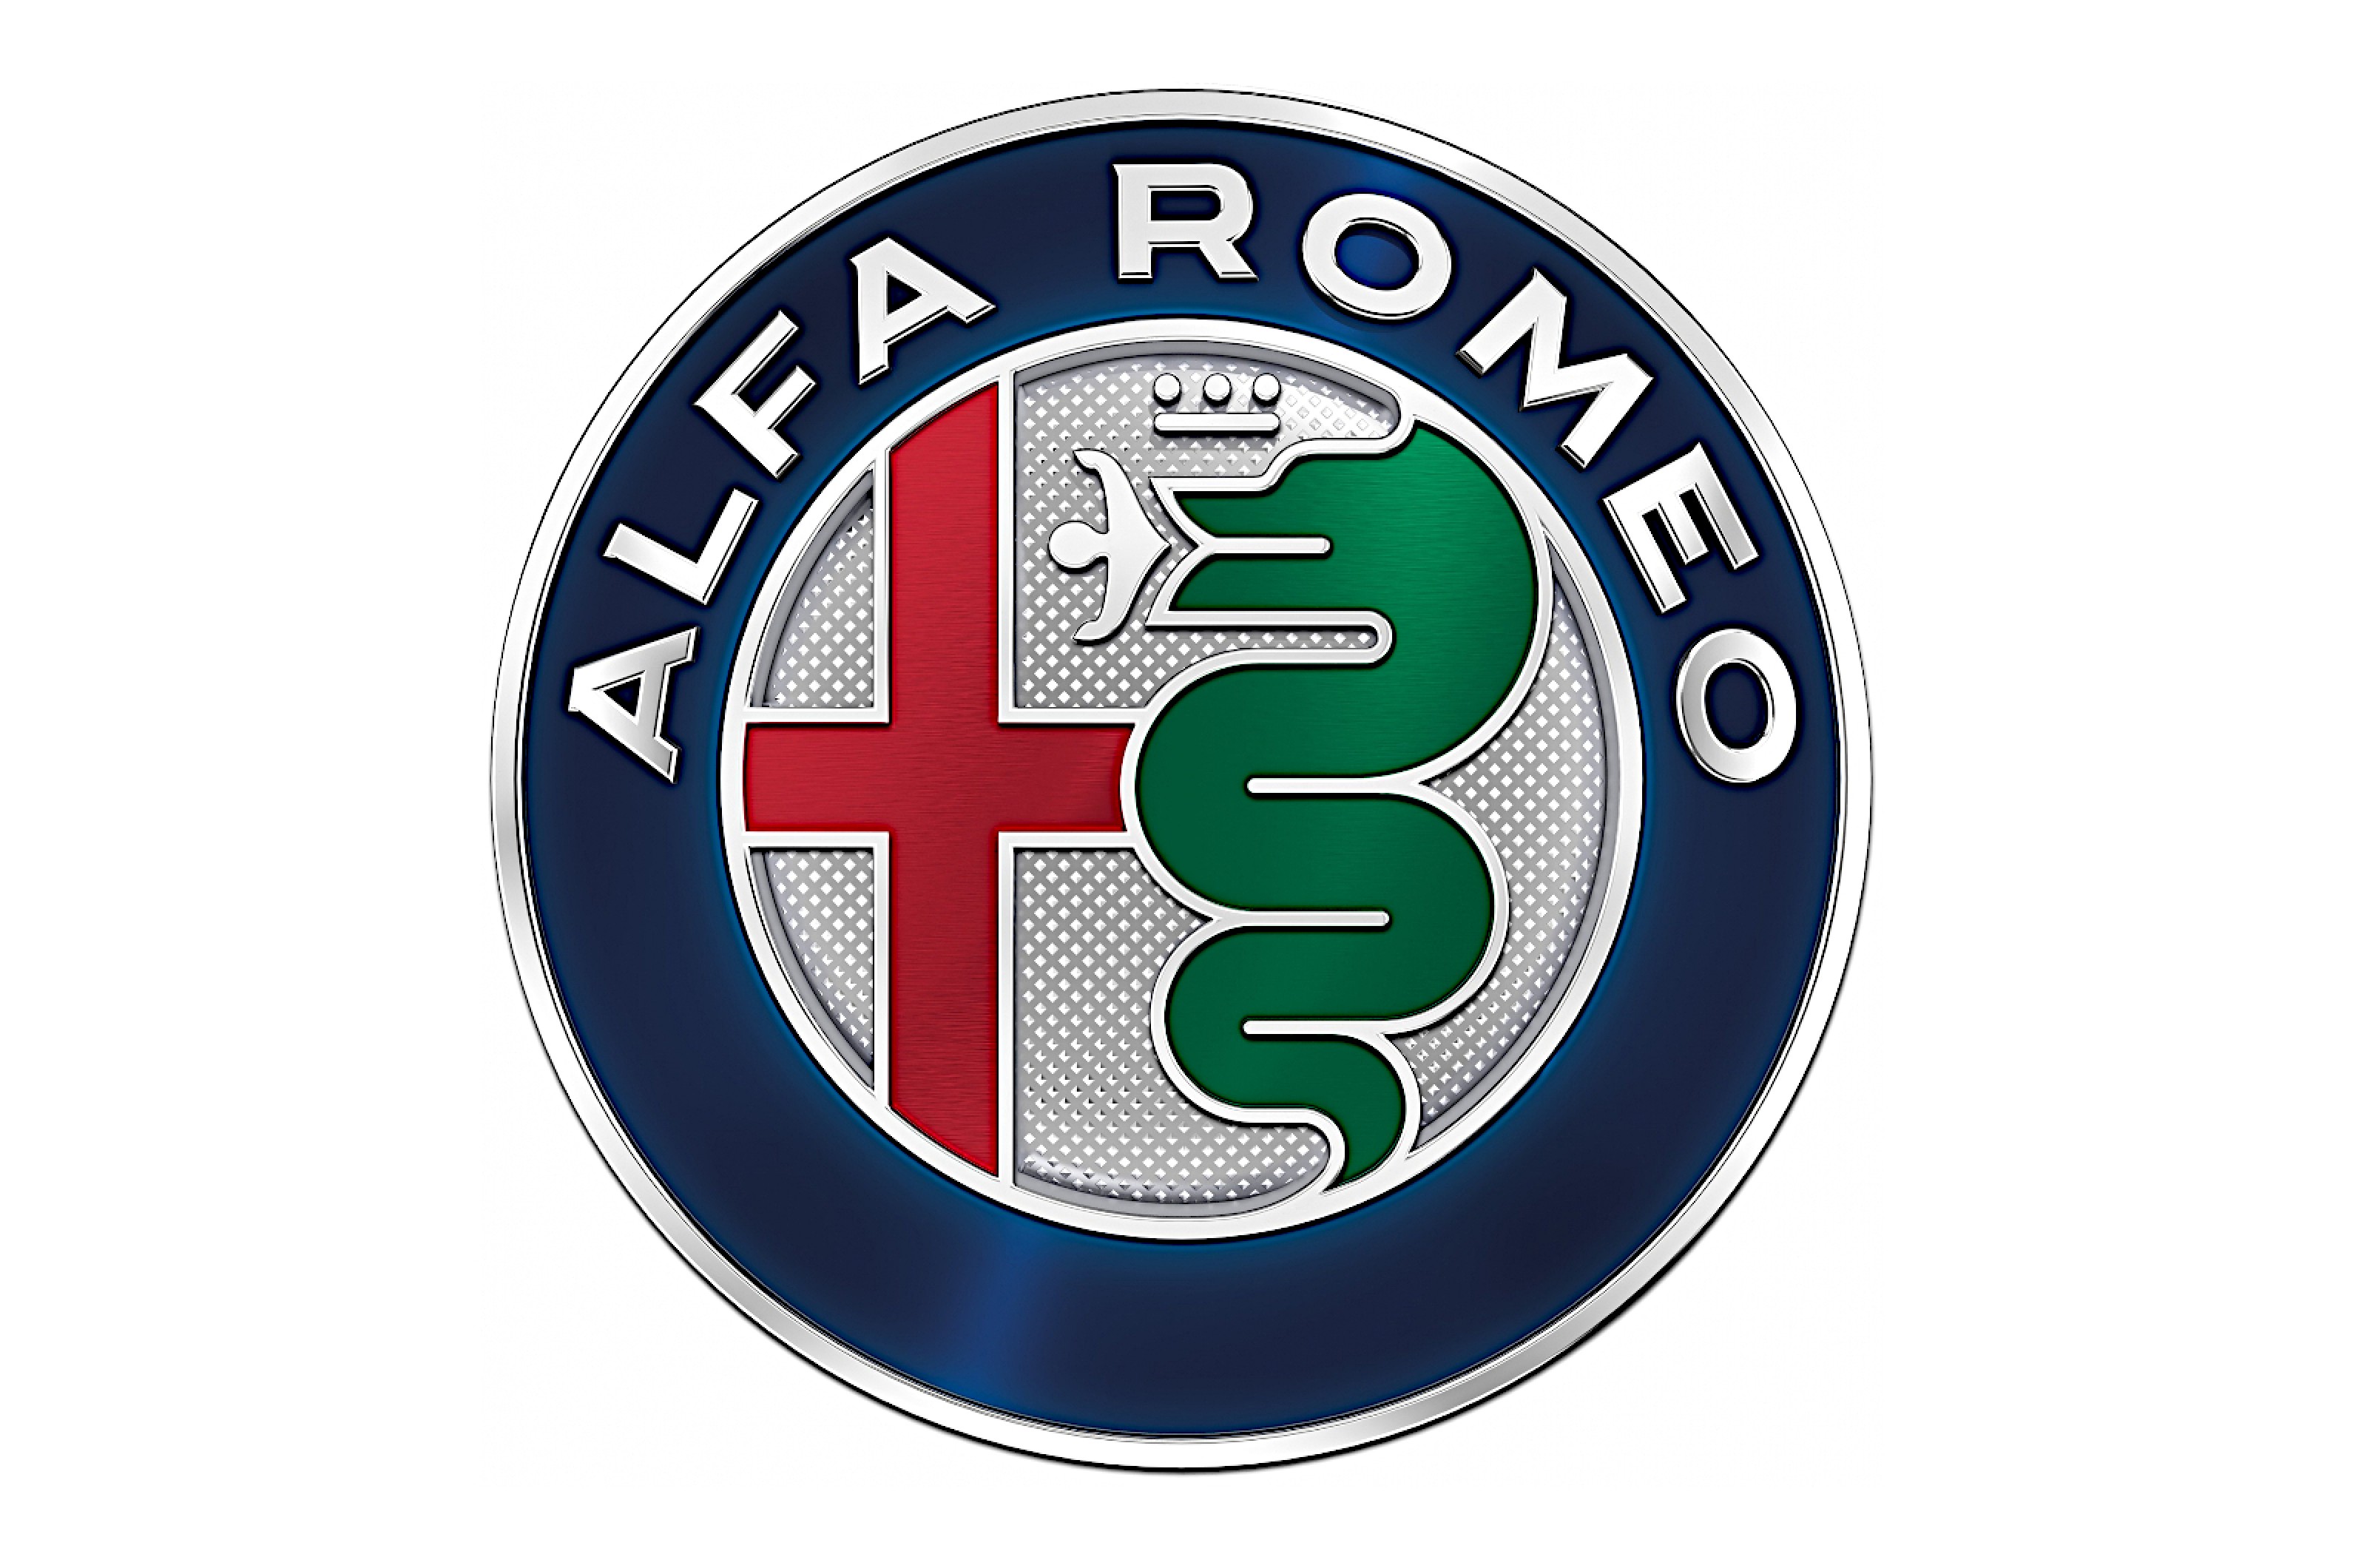 <p>Alfa Romeo’s logo dates back to 1910, when the company was known as Anonima Lombarda Fabbrica Automobili (‘Lombardy Car Manufacturer Ltd.’) or A.L.F.A. for short.</p>  <p>The details have been changed many times, but it has always included two references to Alfa’s home city of Milan.</p>  <p>Within a thick border, the circular design displays the Milanese flag (a red cross on a white background) on the left side.</p>  <p>Opposite this is a rather unsettling image of a man being devoured by serpent, derived from the coat of arms of the Visconti family which ruled Milan from January 1277 until August 1447.</p>